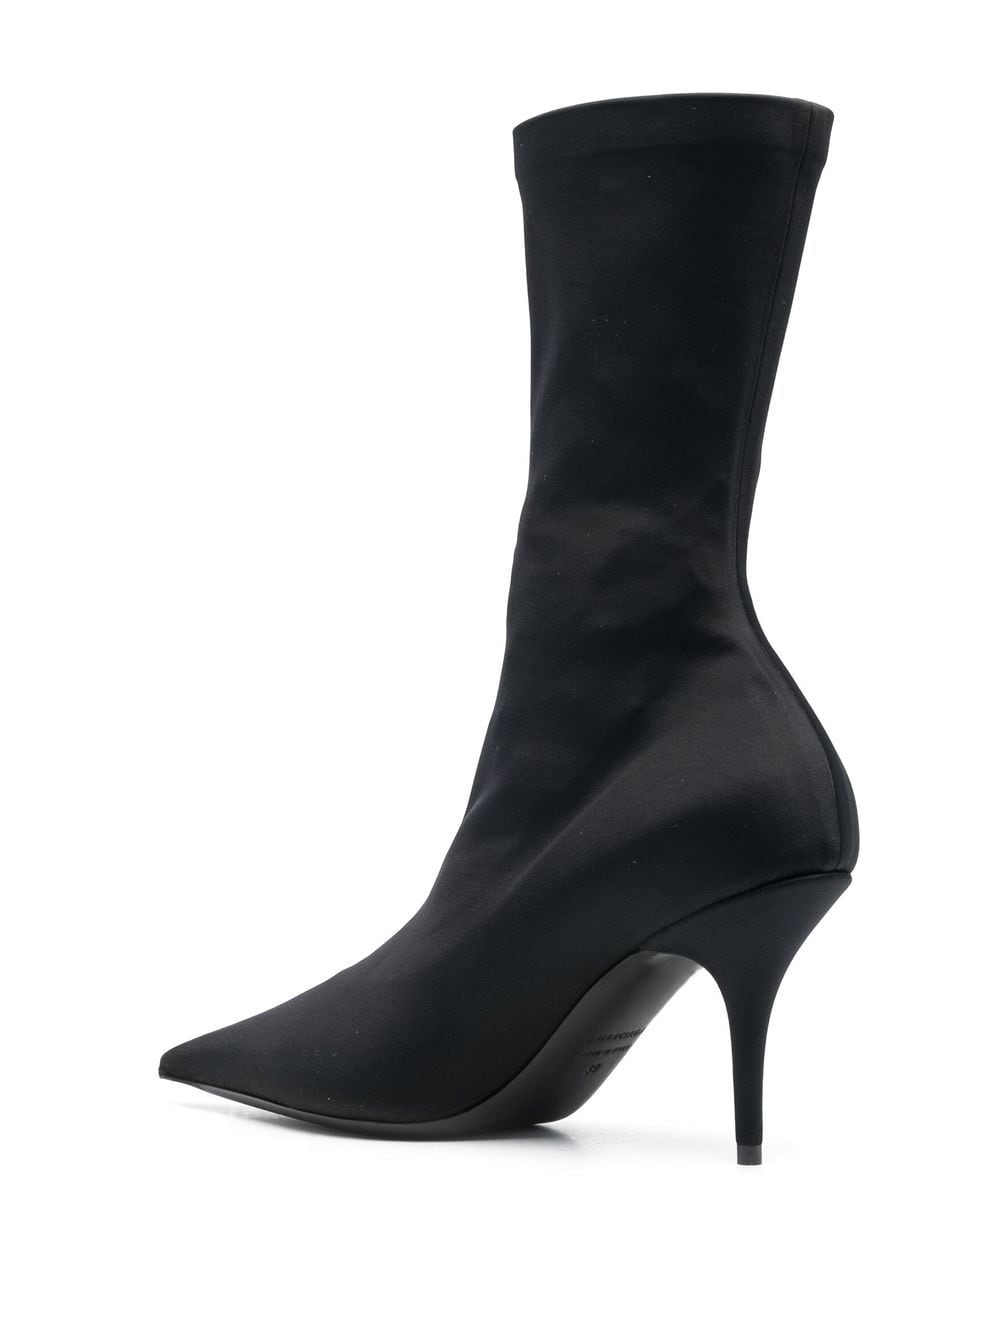 Women's Matte Knife Boots - Sustainable High Heeled Shoes